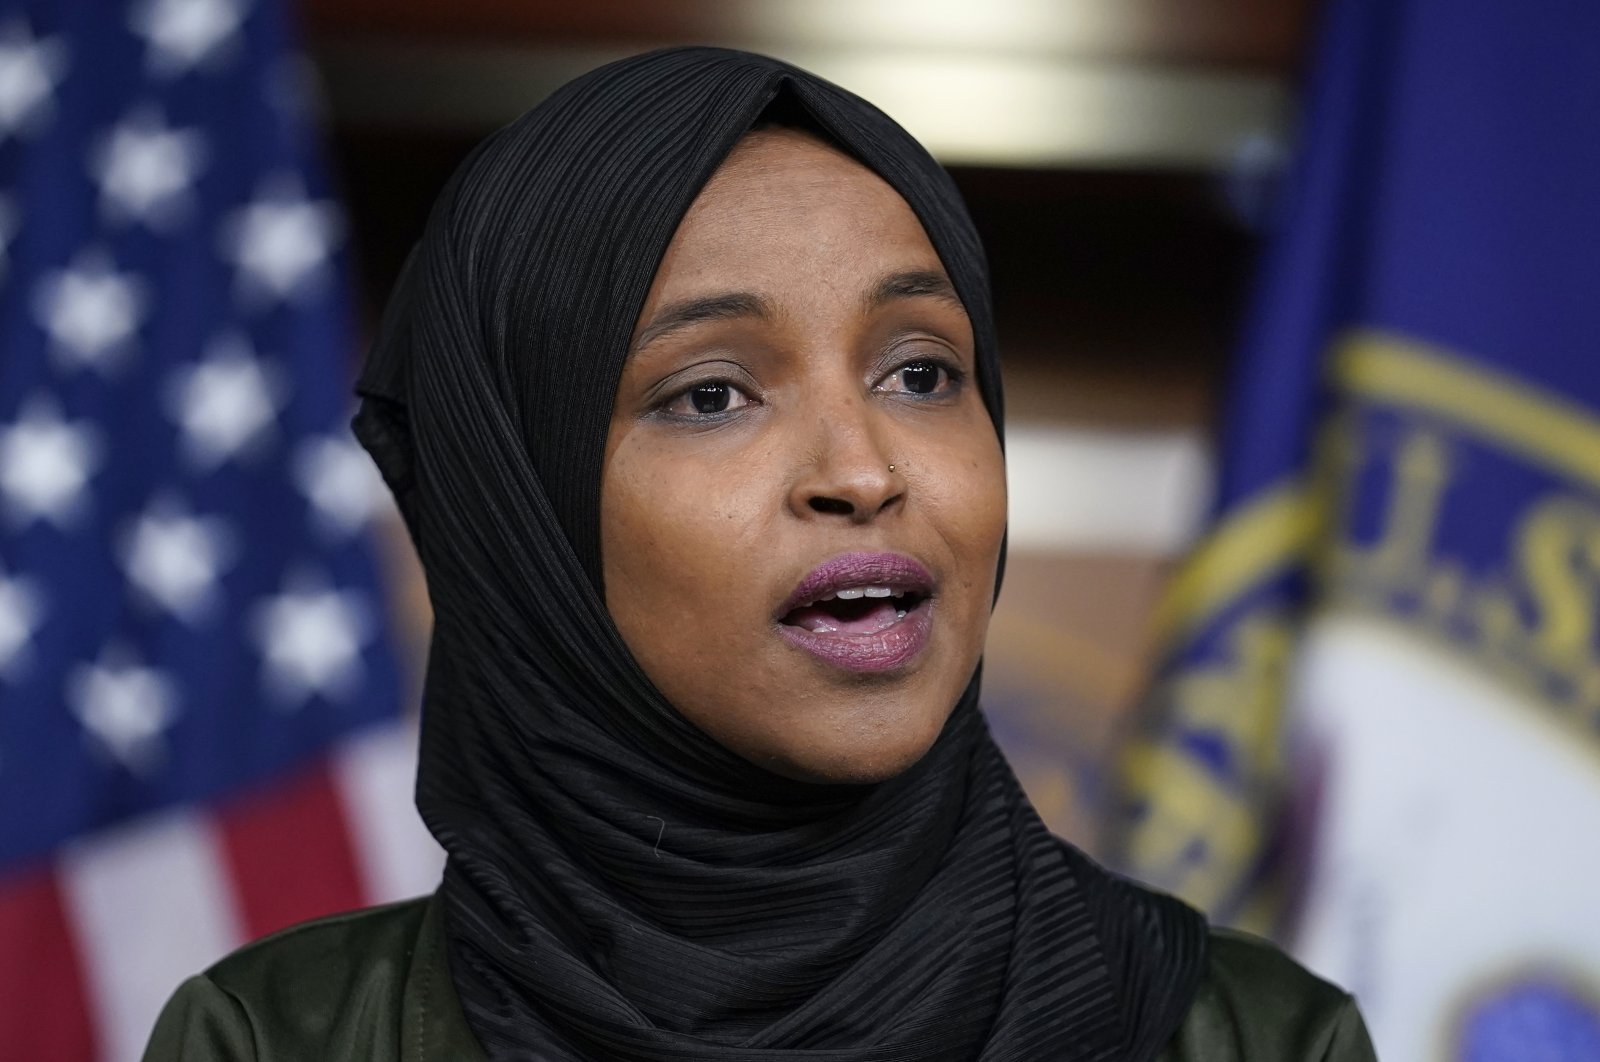 Rep. Ilhan Omar, D-Minnesota, speaks to reporters in the wake of anti-Islamic comments made last week by Rep. Lauren Boebert, R-Colorado, who likened Omar to a bomb-carrying terrorist, during a news conference at the Capitol in Washington, U.S., Nov. 30, 2021. (AP Photo)